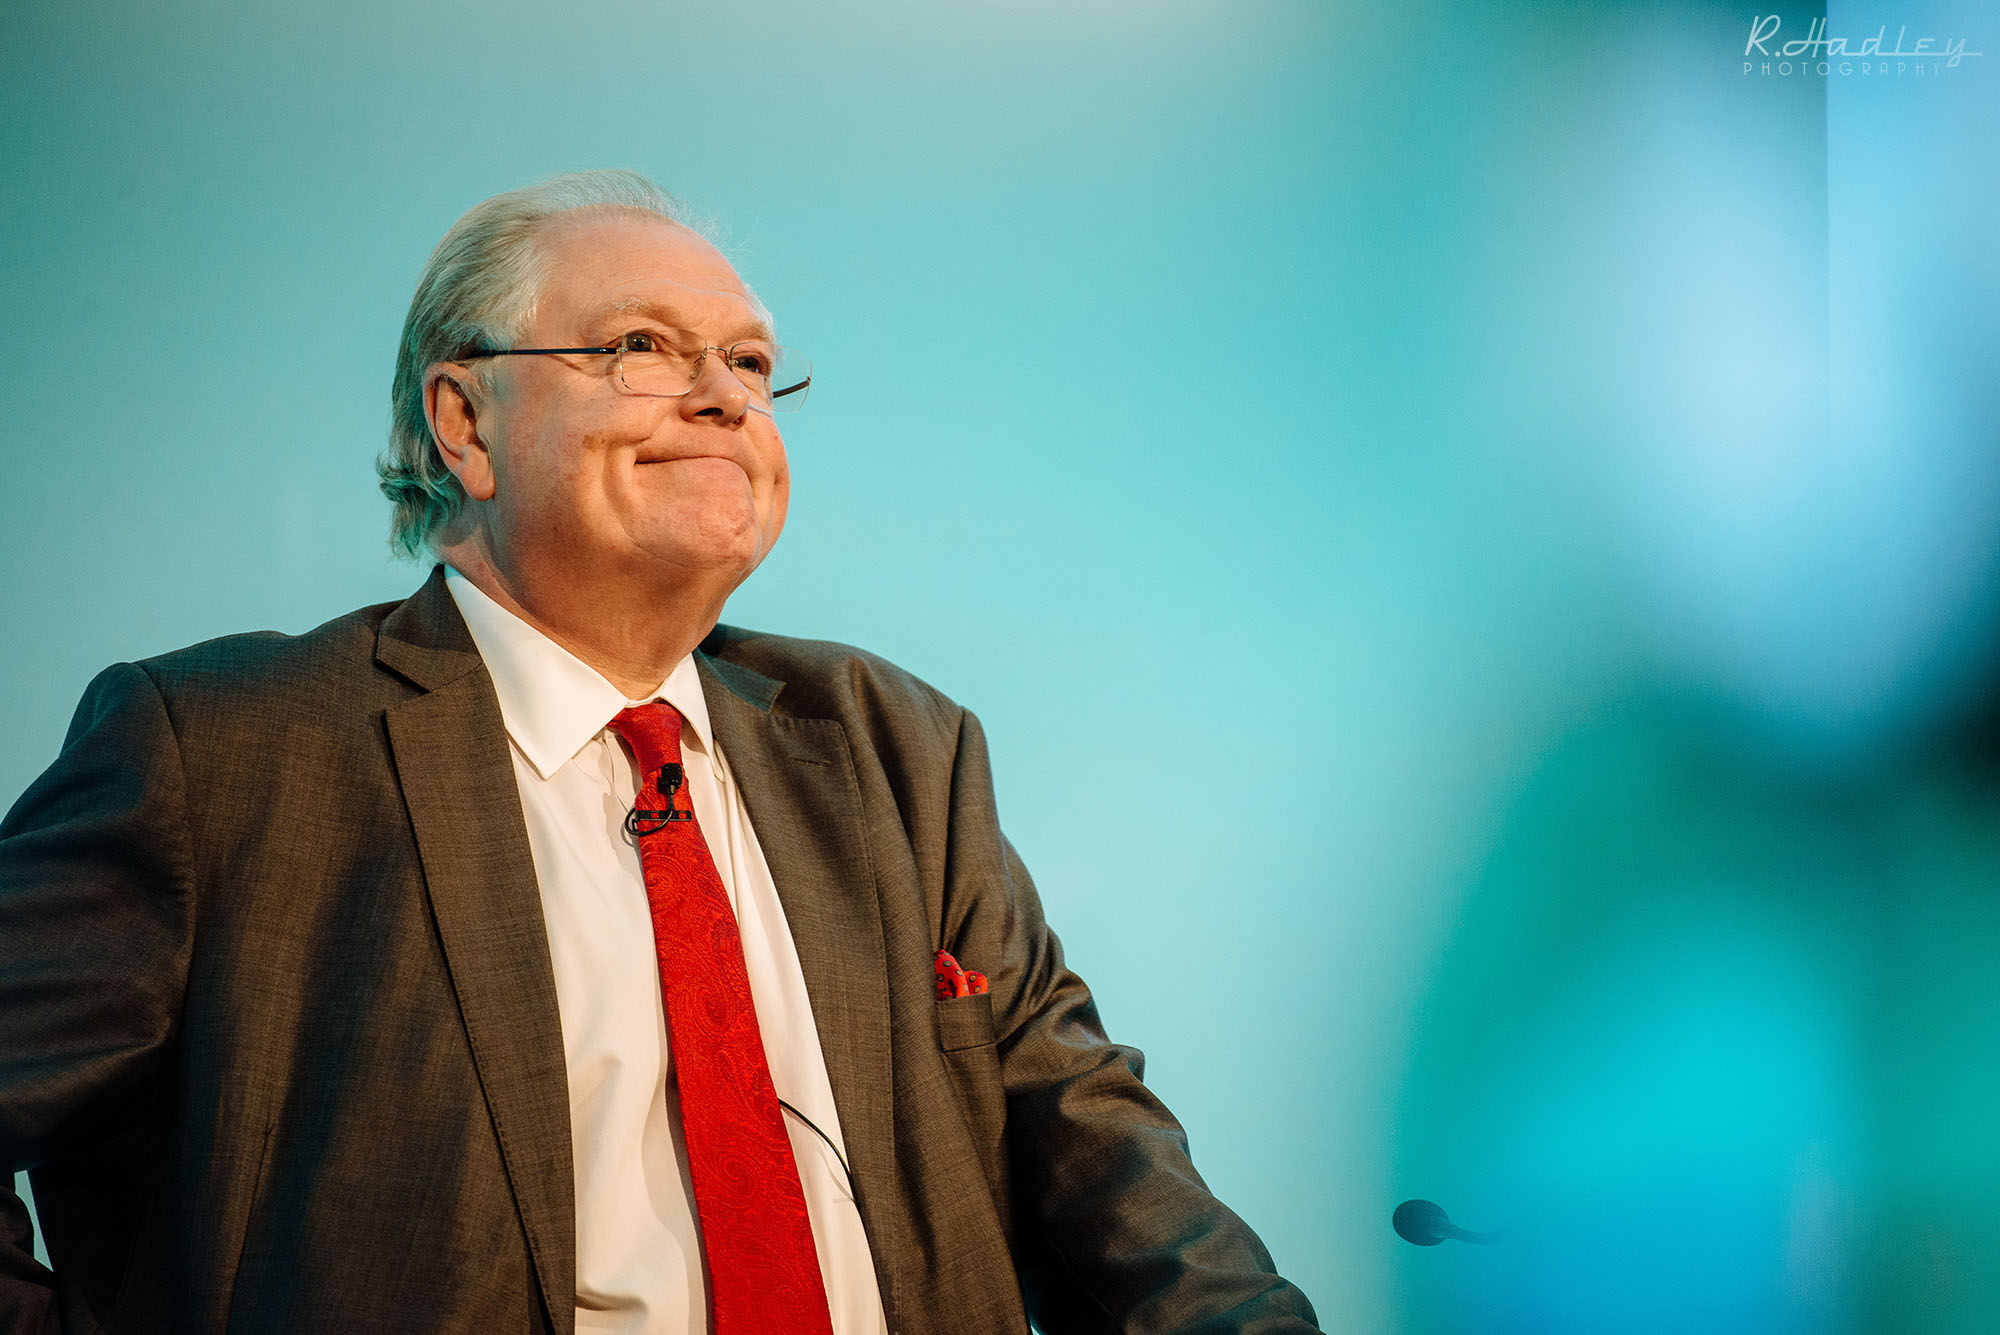 Digby Jones speaking at a Corporate Event in London